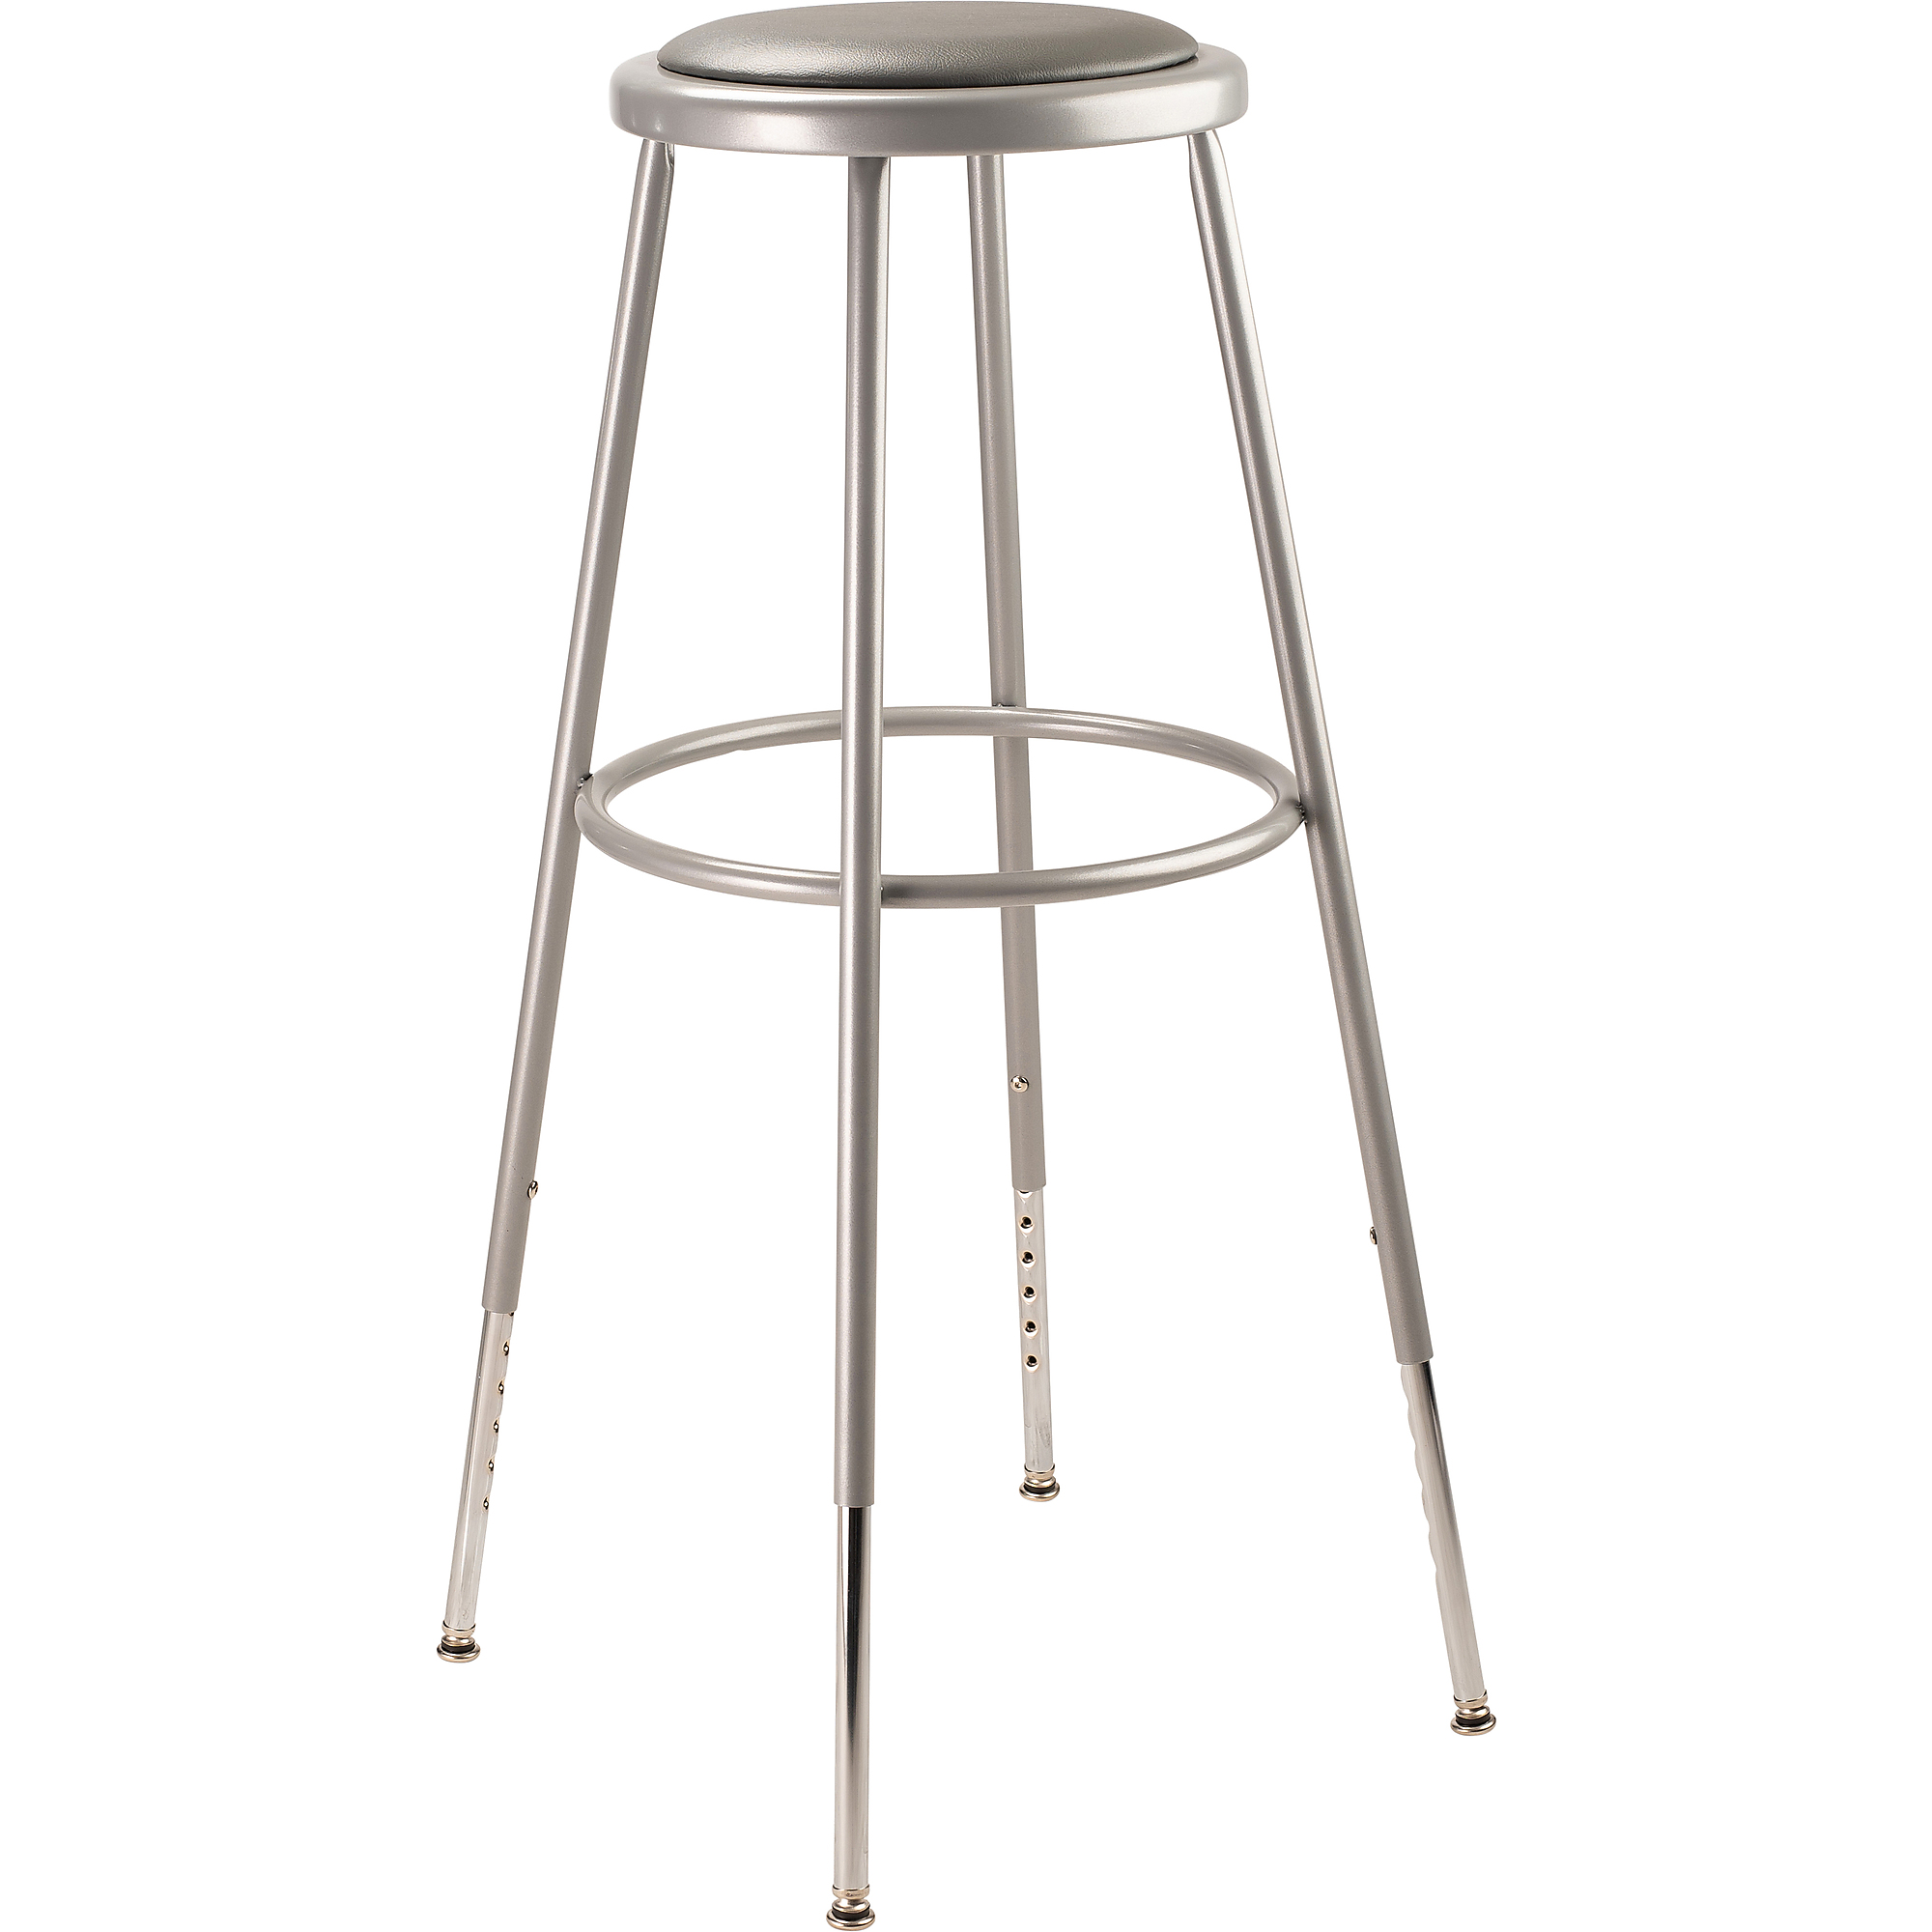 National Public Seating, 30.5 -38.5Inch Height Adjustable Vinyl Stool, Primary Color Gray, Included (qty.) 1, Seating Type Office Stool, Model 6430H